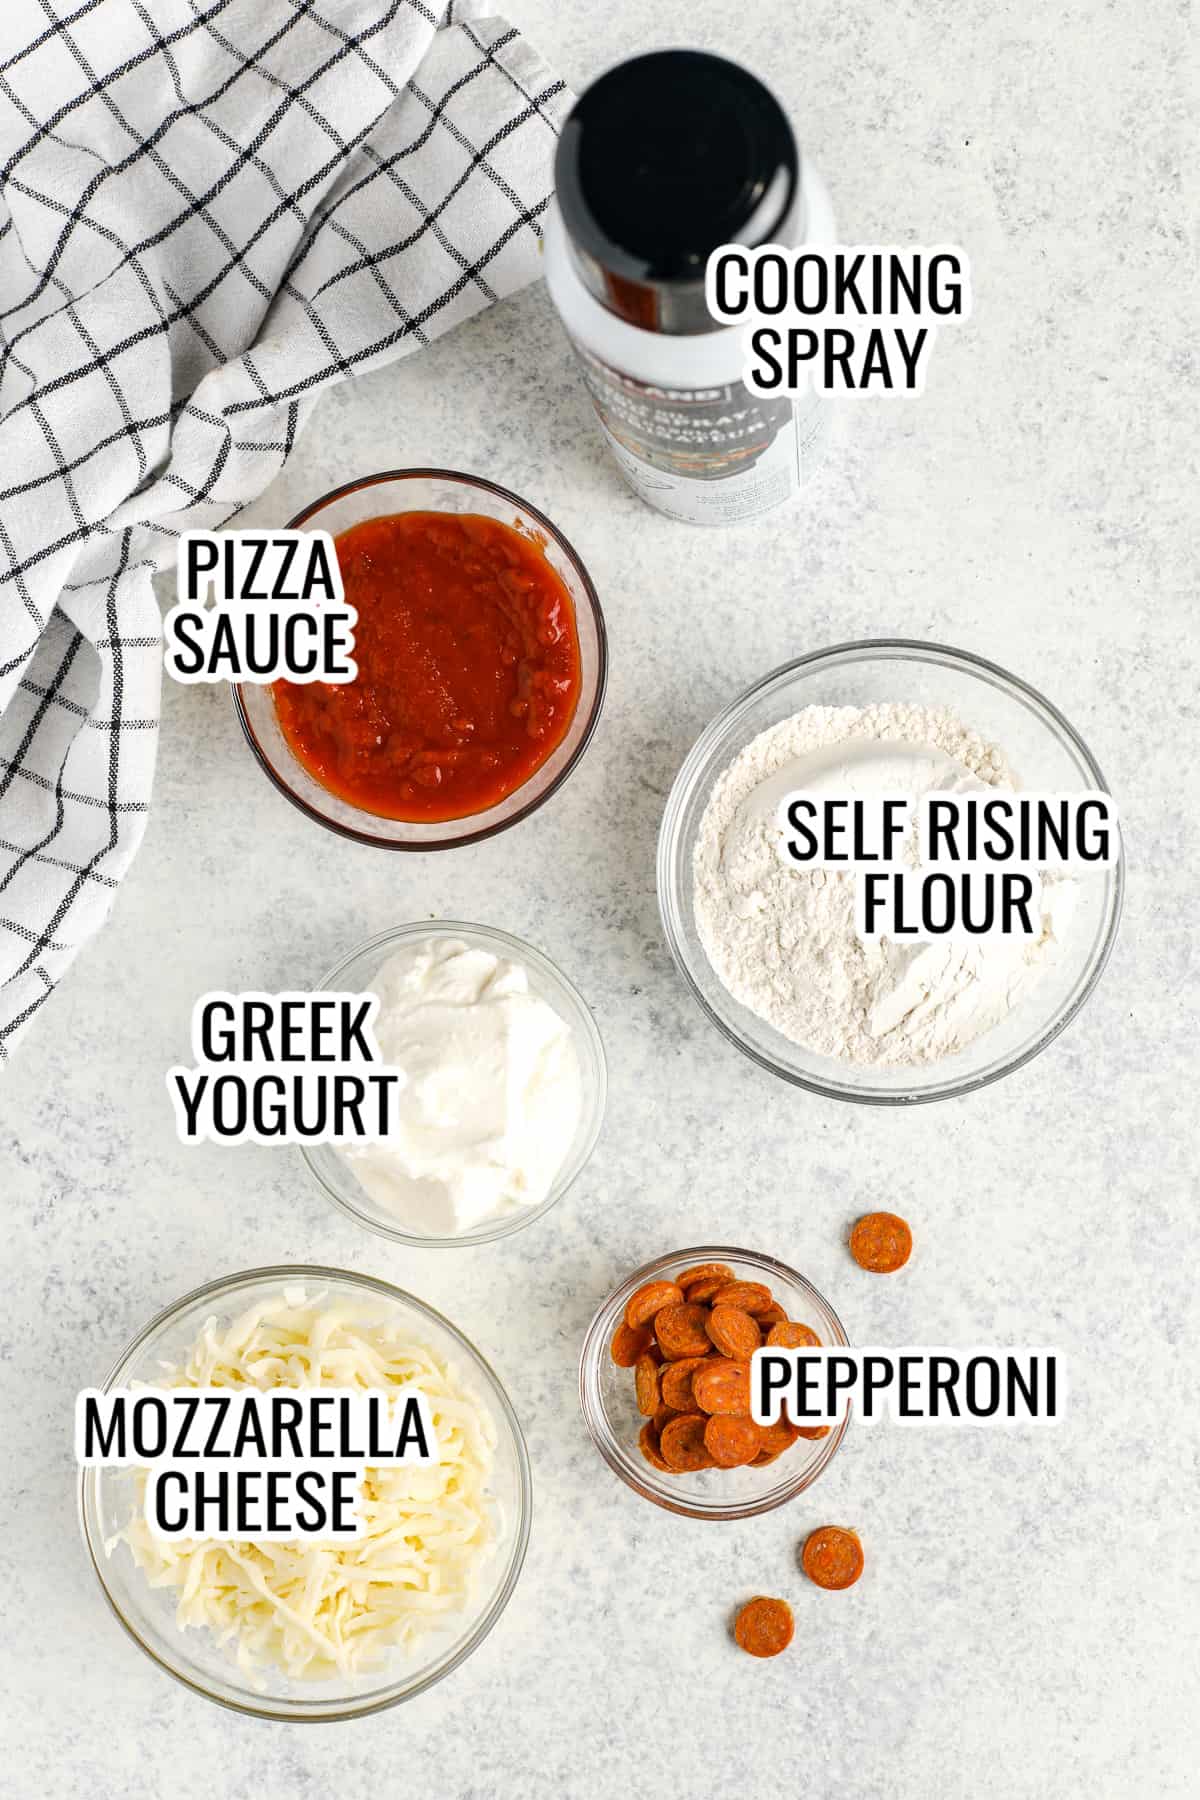 ingredients assembled to make air fryer pizza, including pizza sauce, four, greek yogurt, pepperoni, and mozzarella cheese